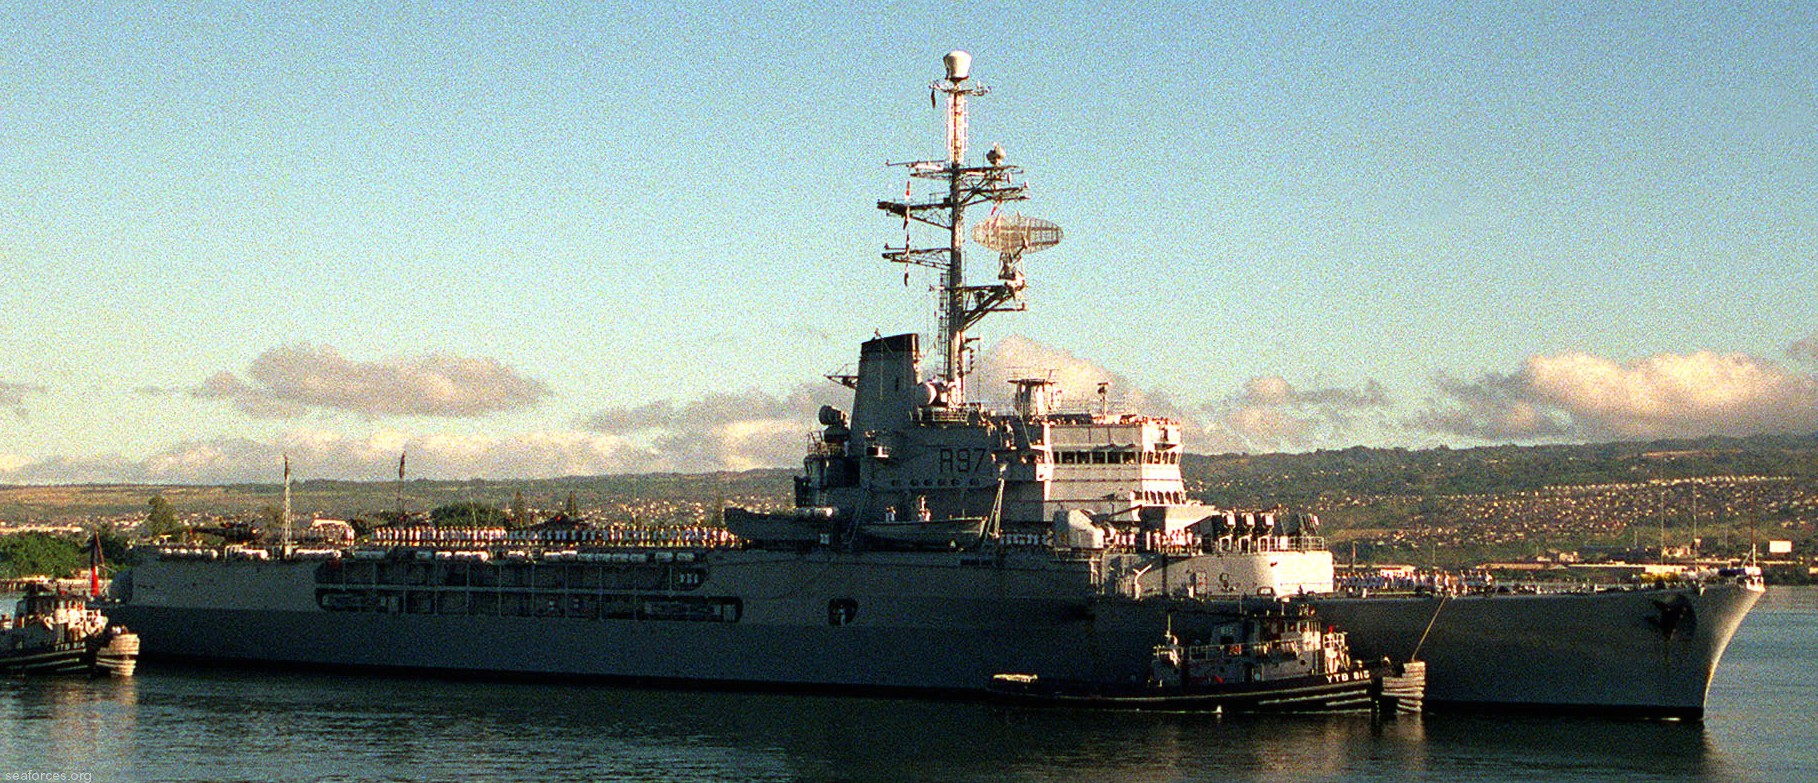 r-97 fs jeanne d'arc helicopter carrier cruiser french navy marine nationale 05 pearl harbor hawaii